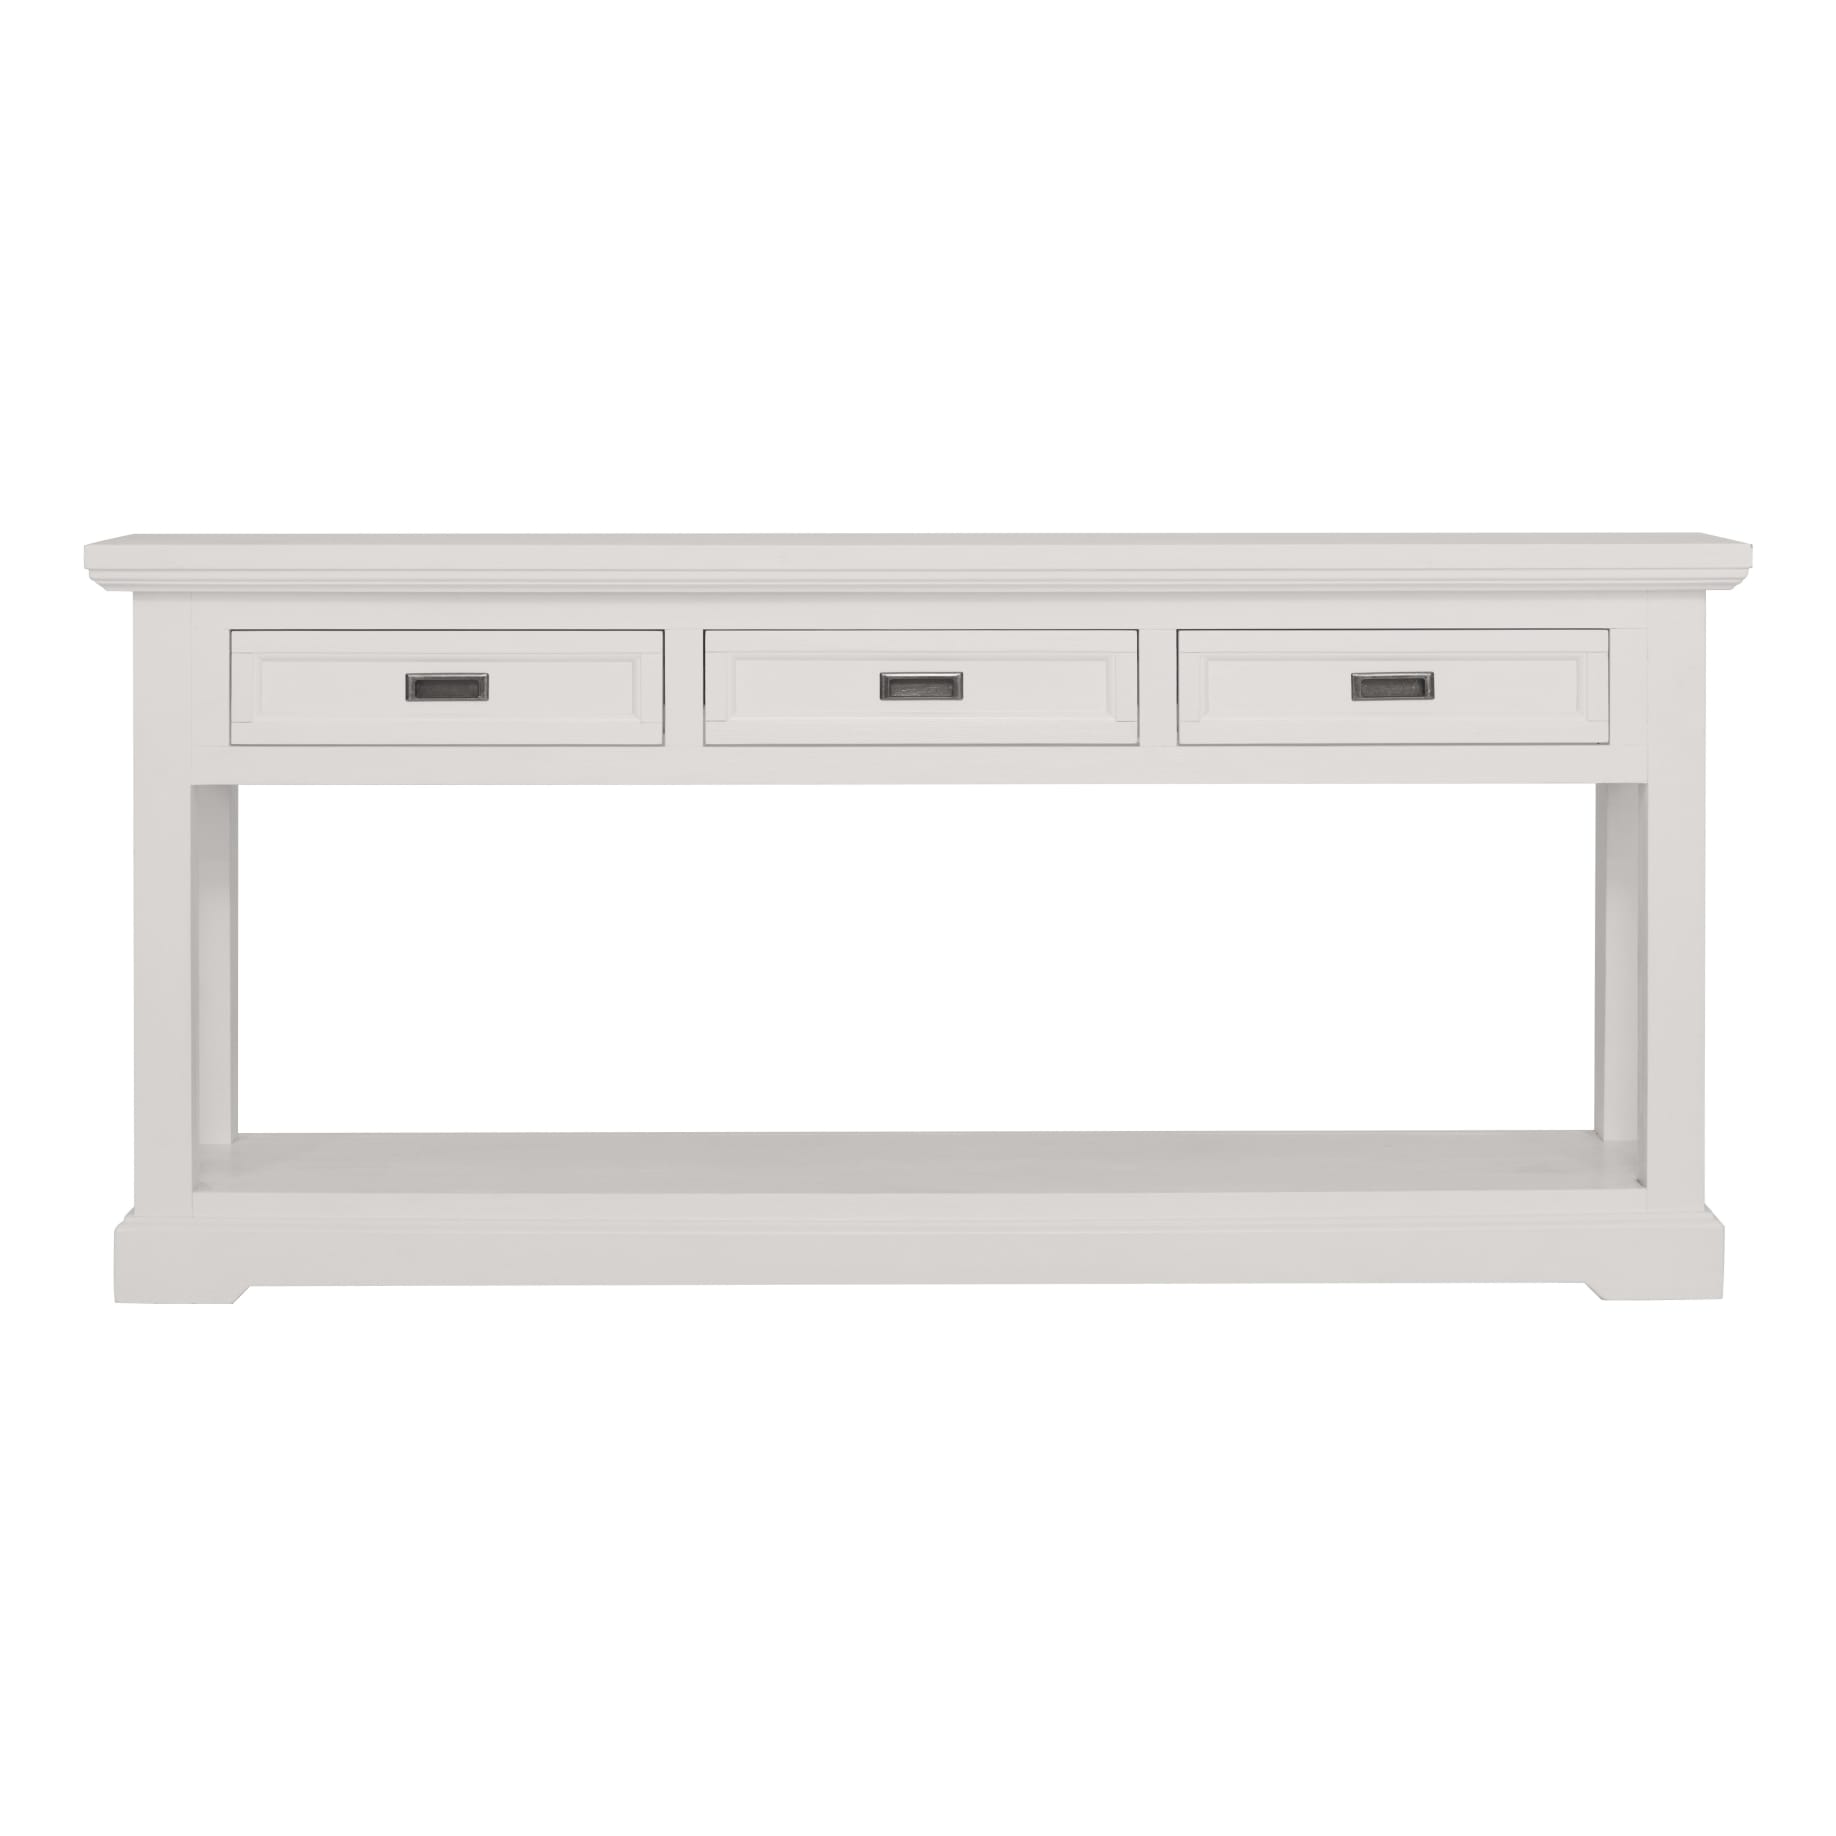 Hamptons Console Table 175cm Drawer in Acacia White